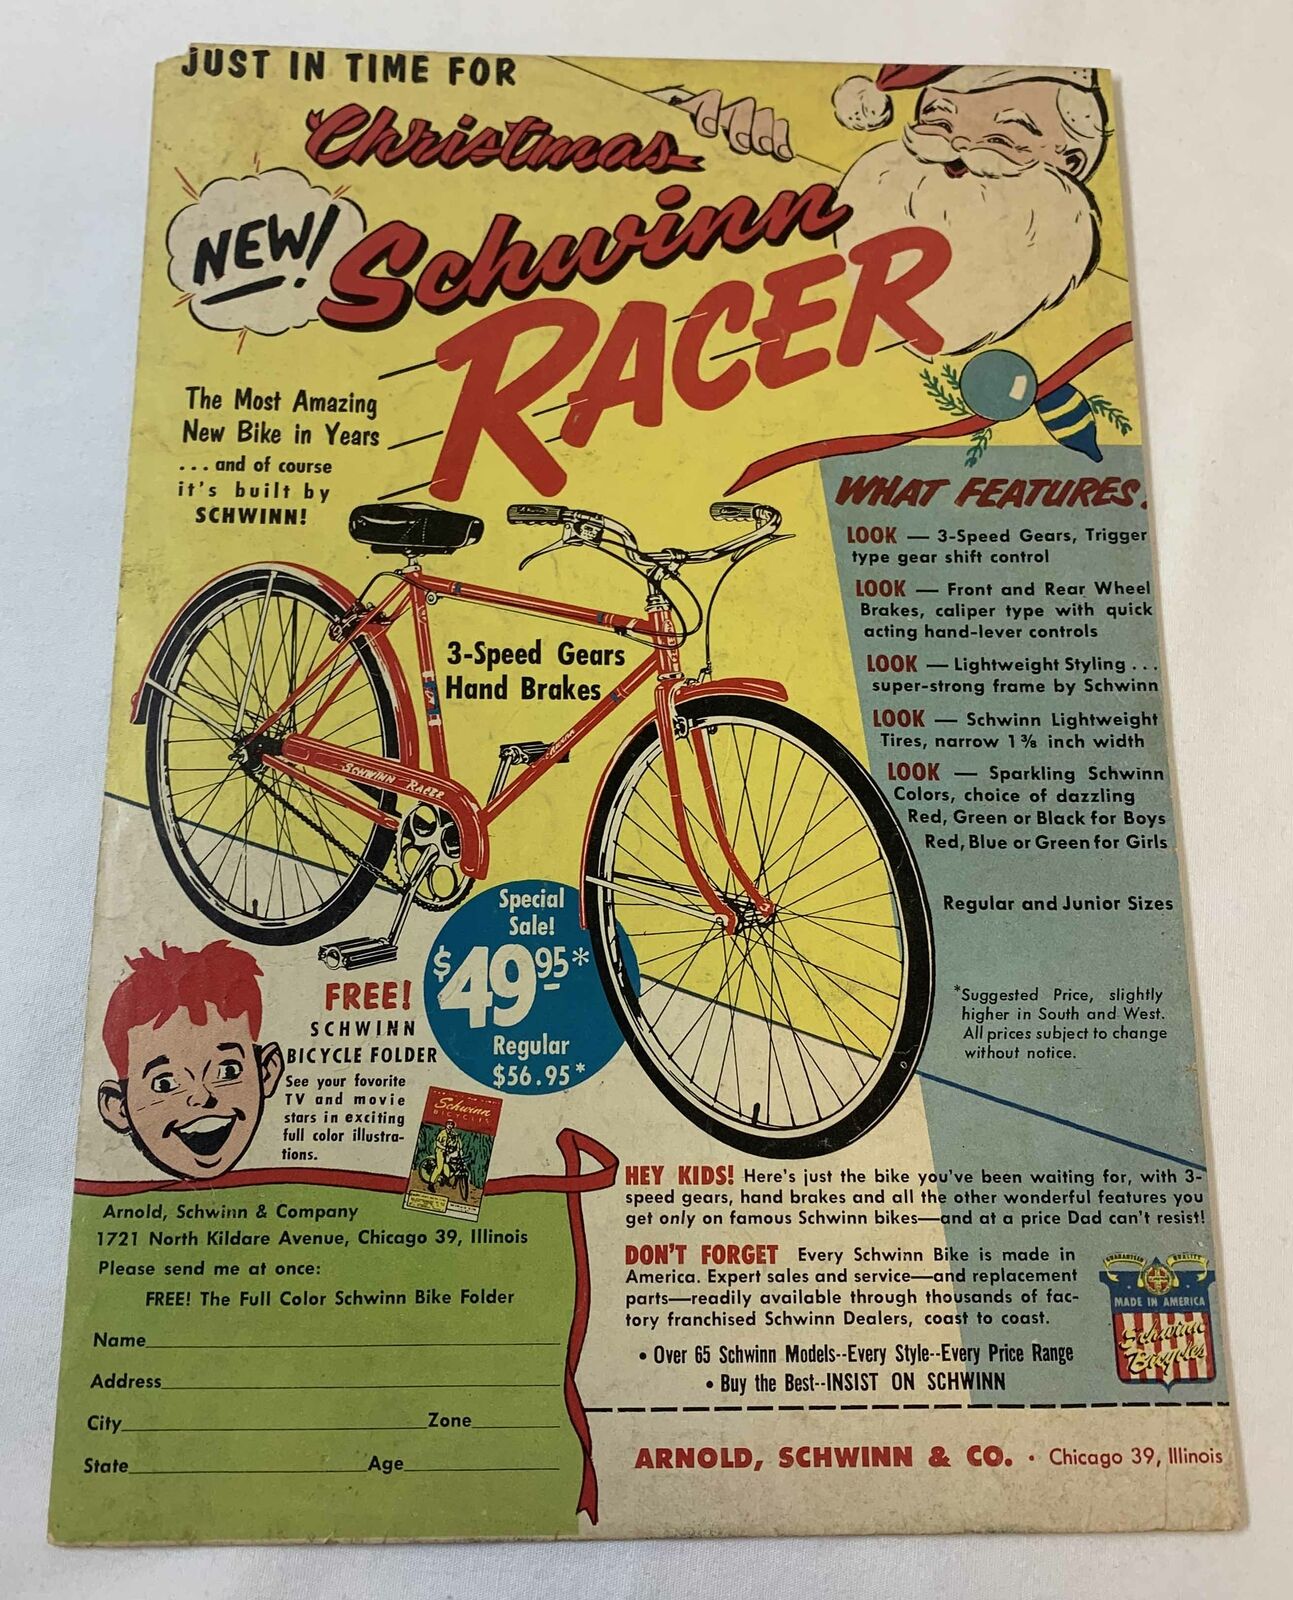 1955 SCHWINN RACER bicycle ad page ~ Just In Time For Christmas